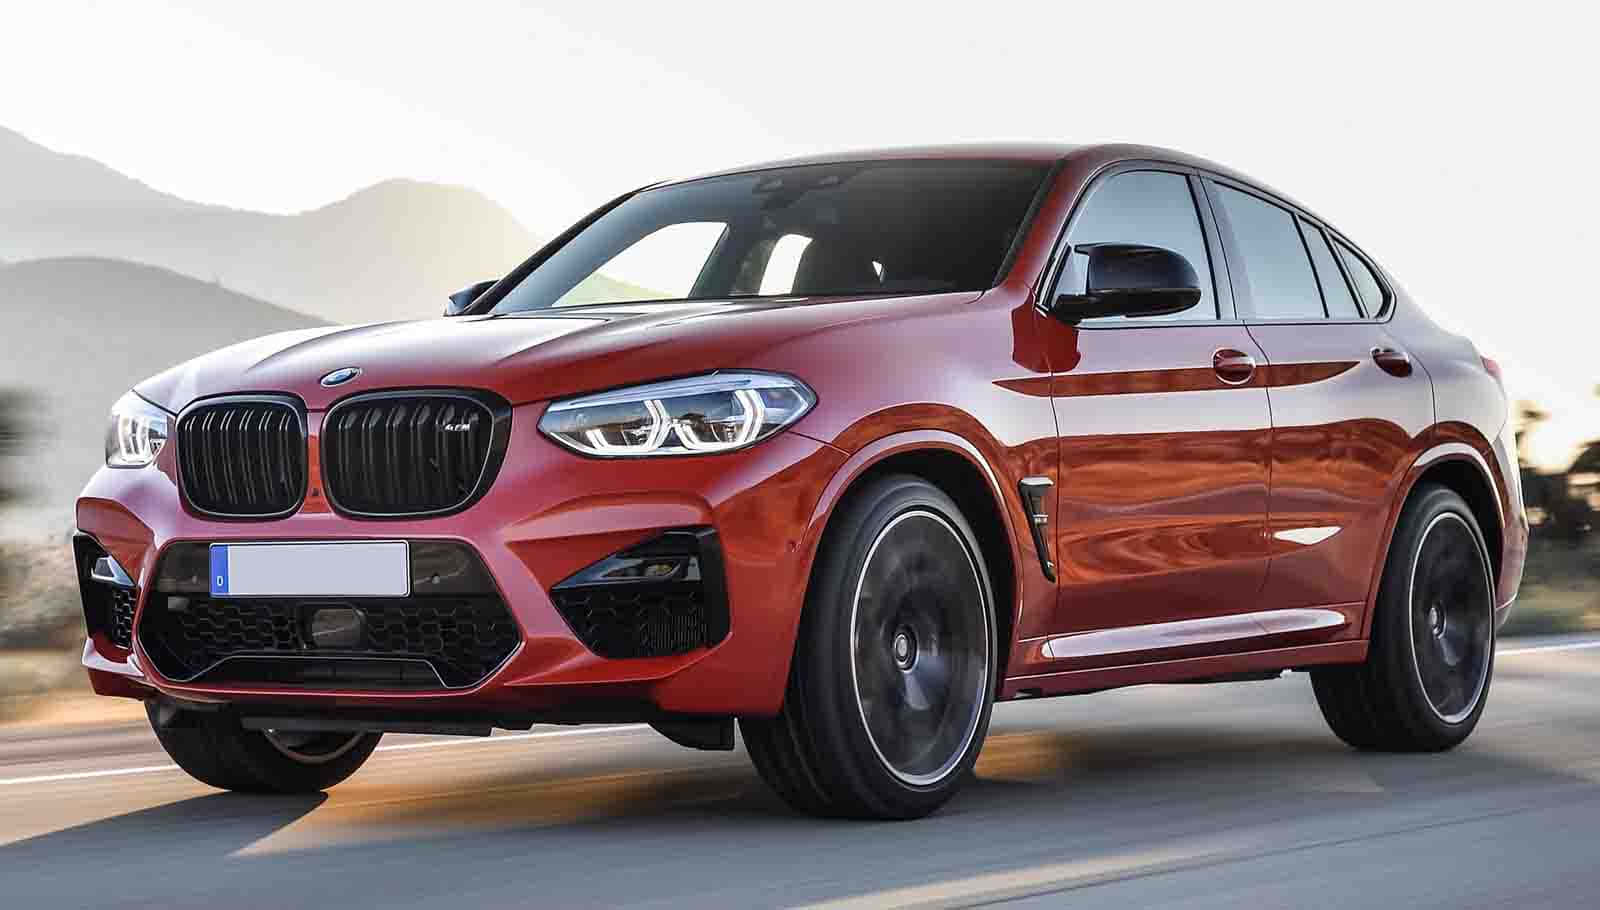 Captivating BMW X4 - The Perfect Combination of Sportiness and Luxury Wallpaper